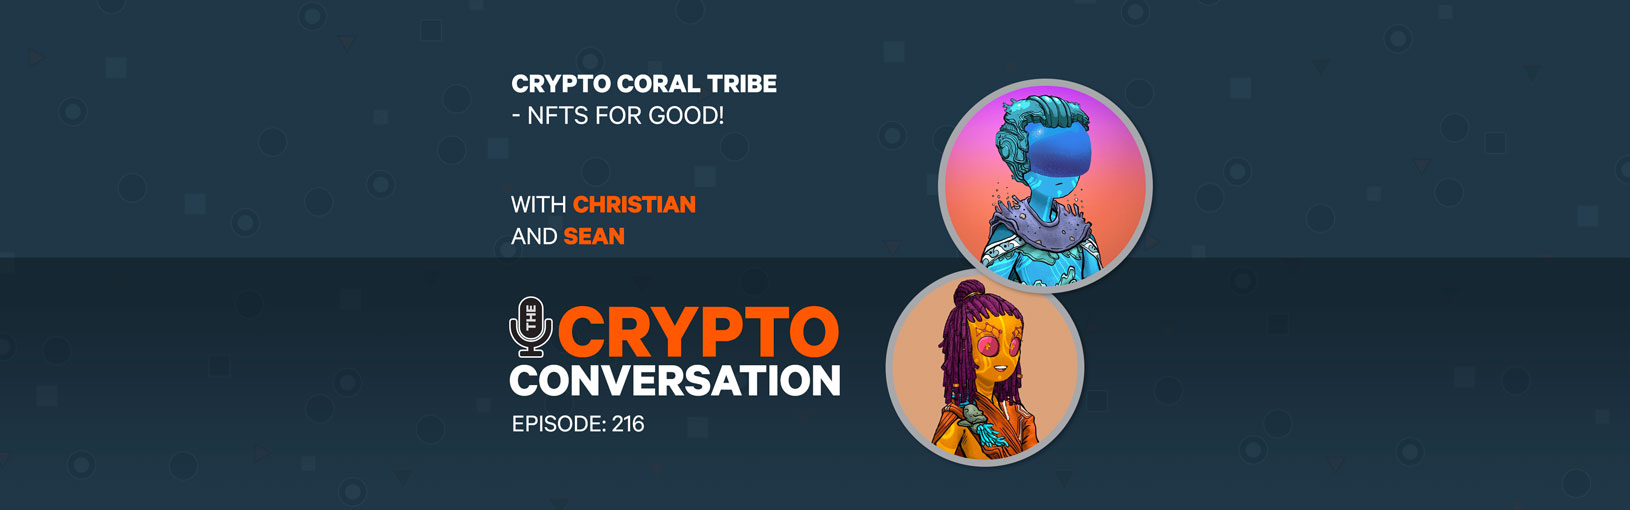 Crypto Coral Tribe – NFTs for good!